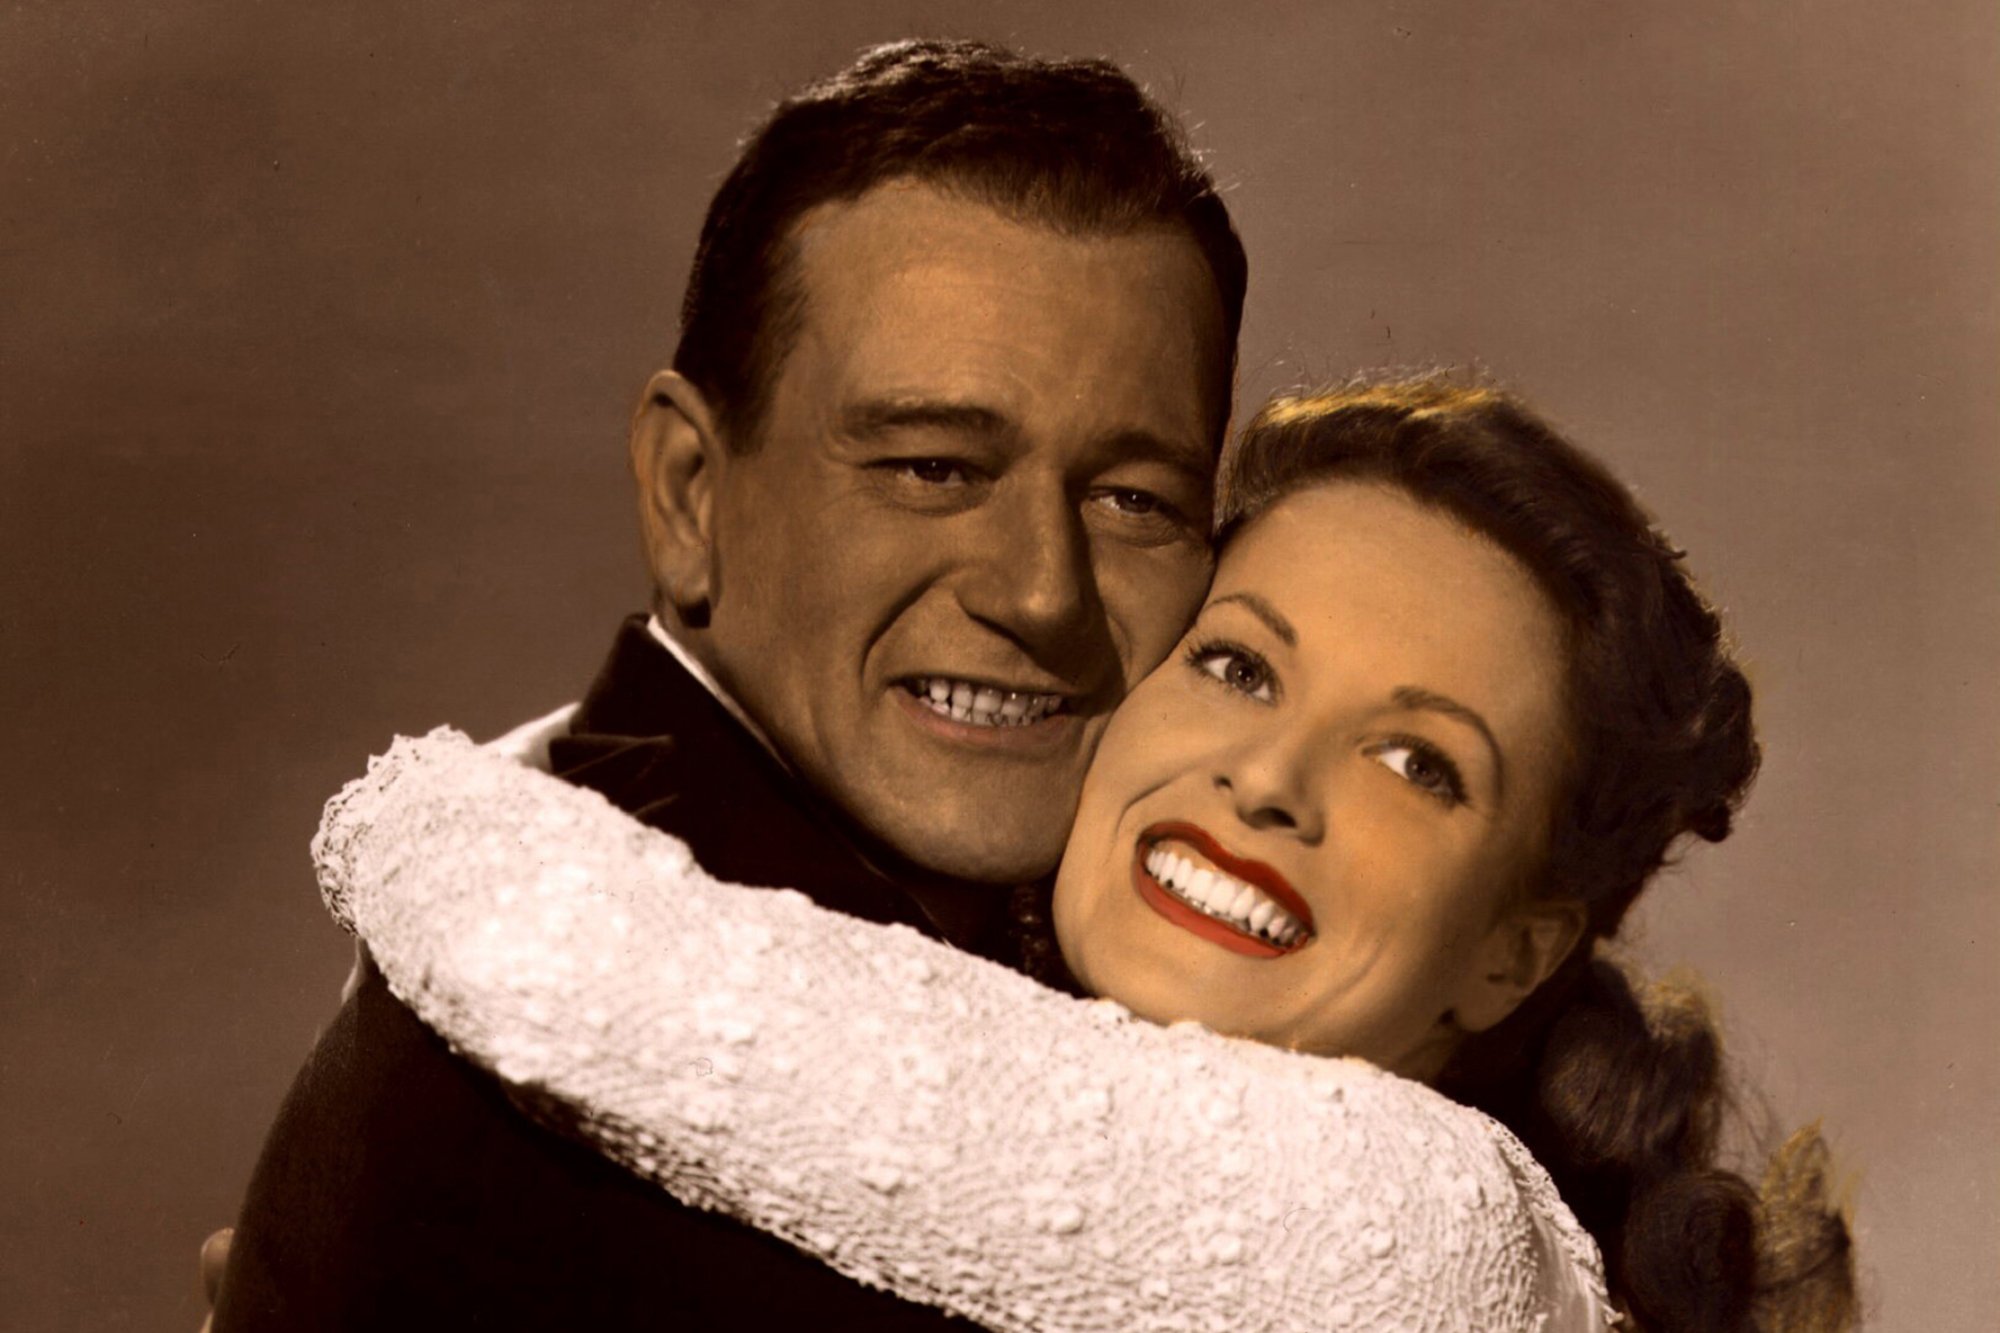 'The Quiet Man' John Wayne and Maureen O'Hara on the John Ford film. The two actors are smiling and hugging while looking at the camera.